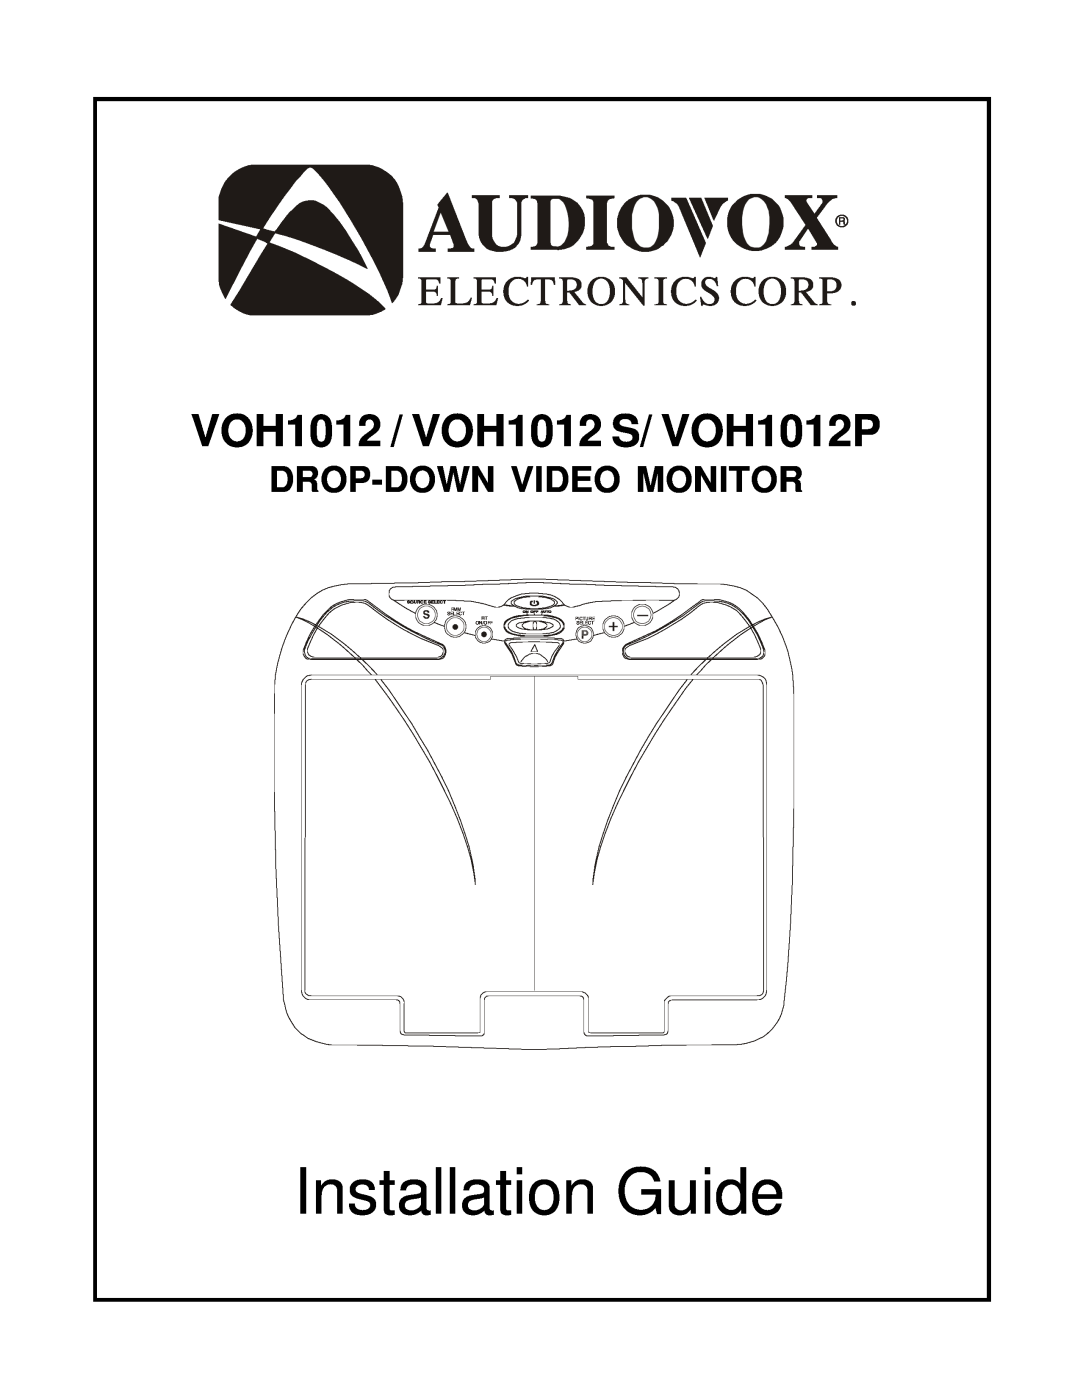 Audiovox manual Installation Guide, Electronics Corp, VOH1012 / VOH1012 S/ VOH1012P, Drop-Down Video Monitor, Select 